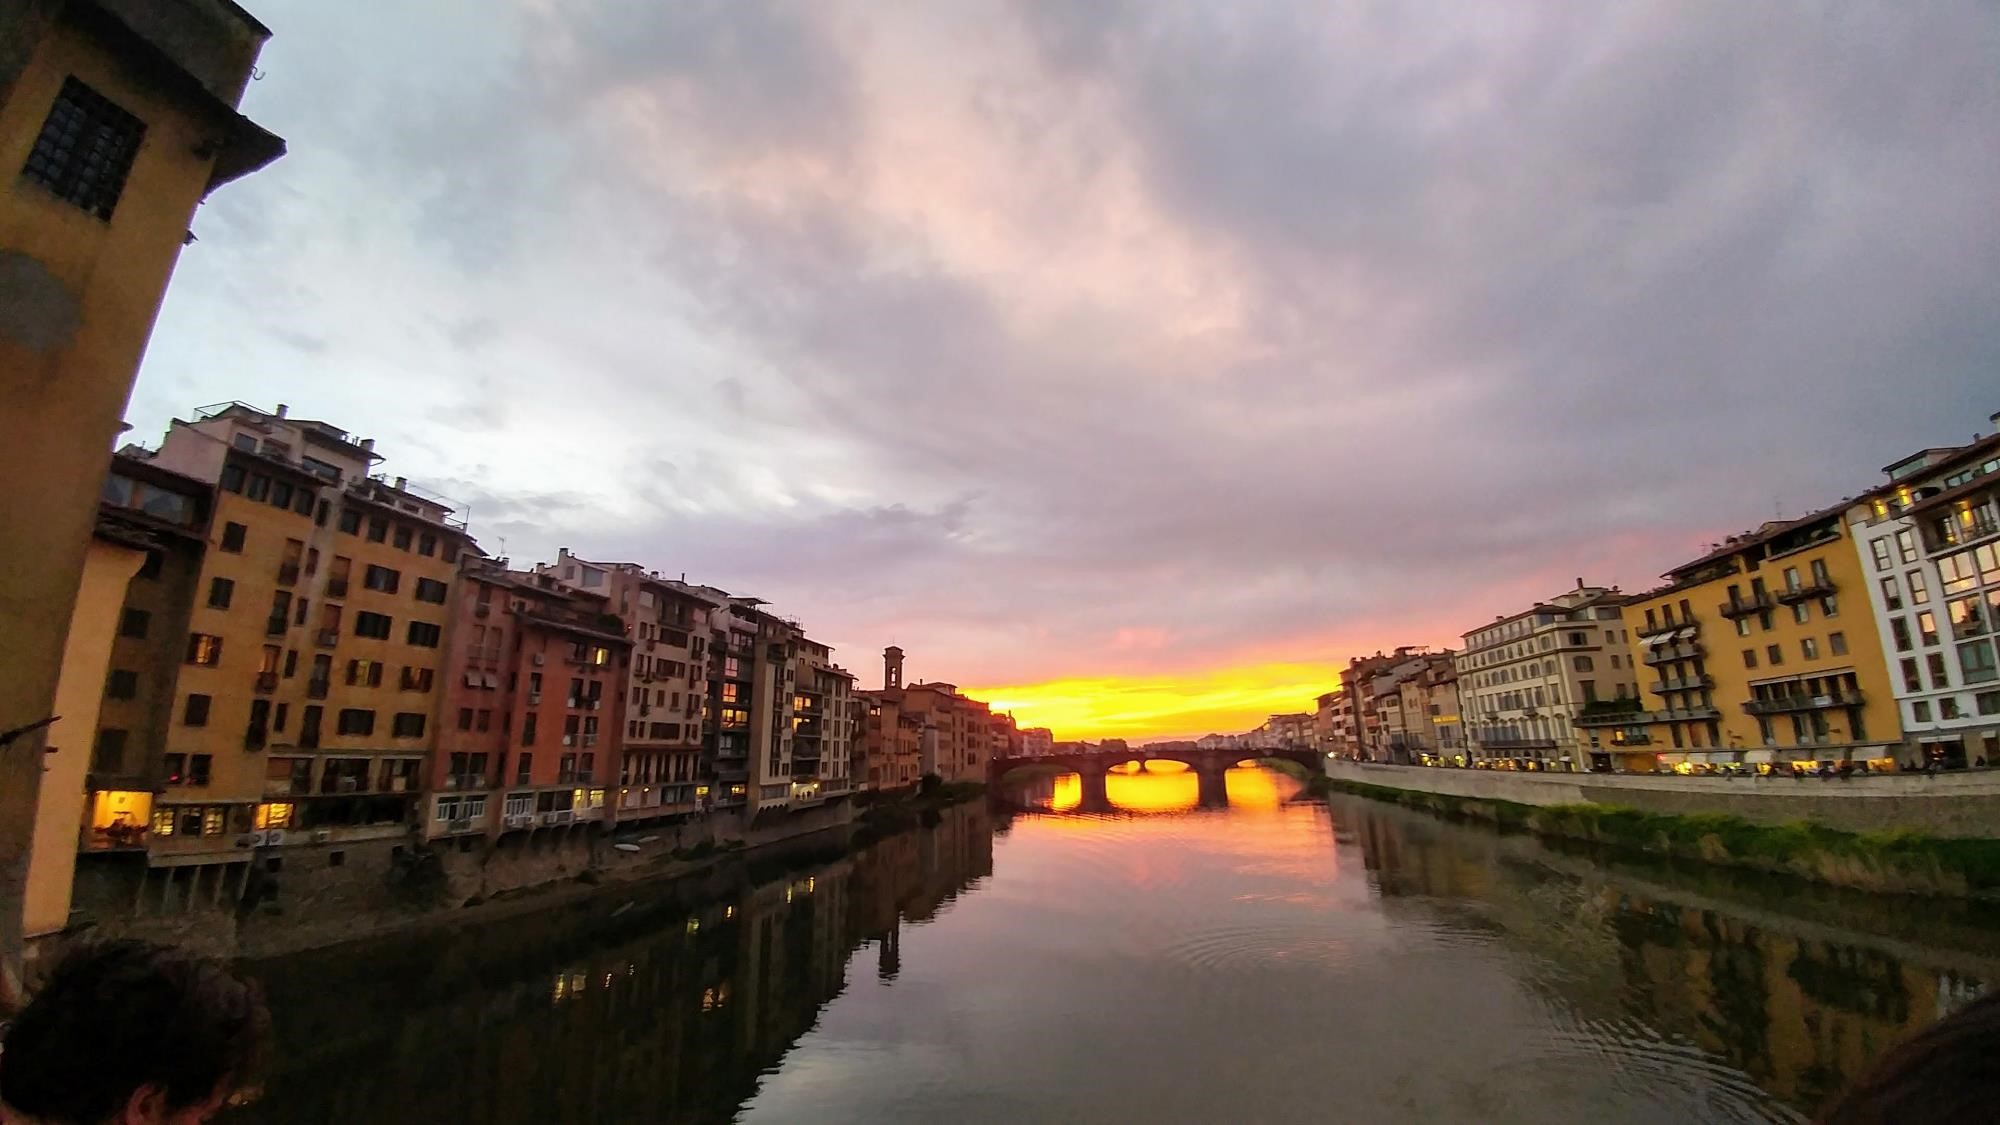 Looking over the River Arno in Florence at sunset